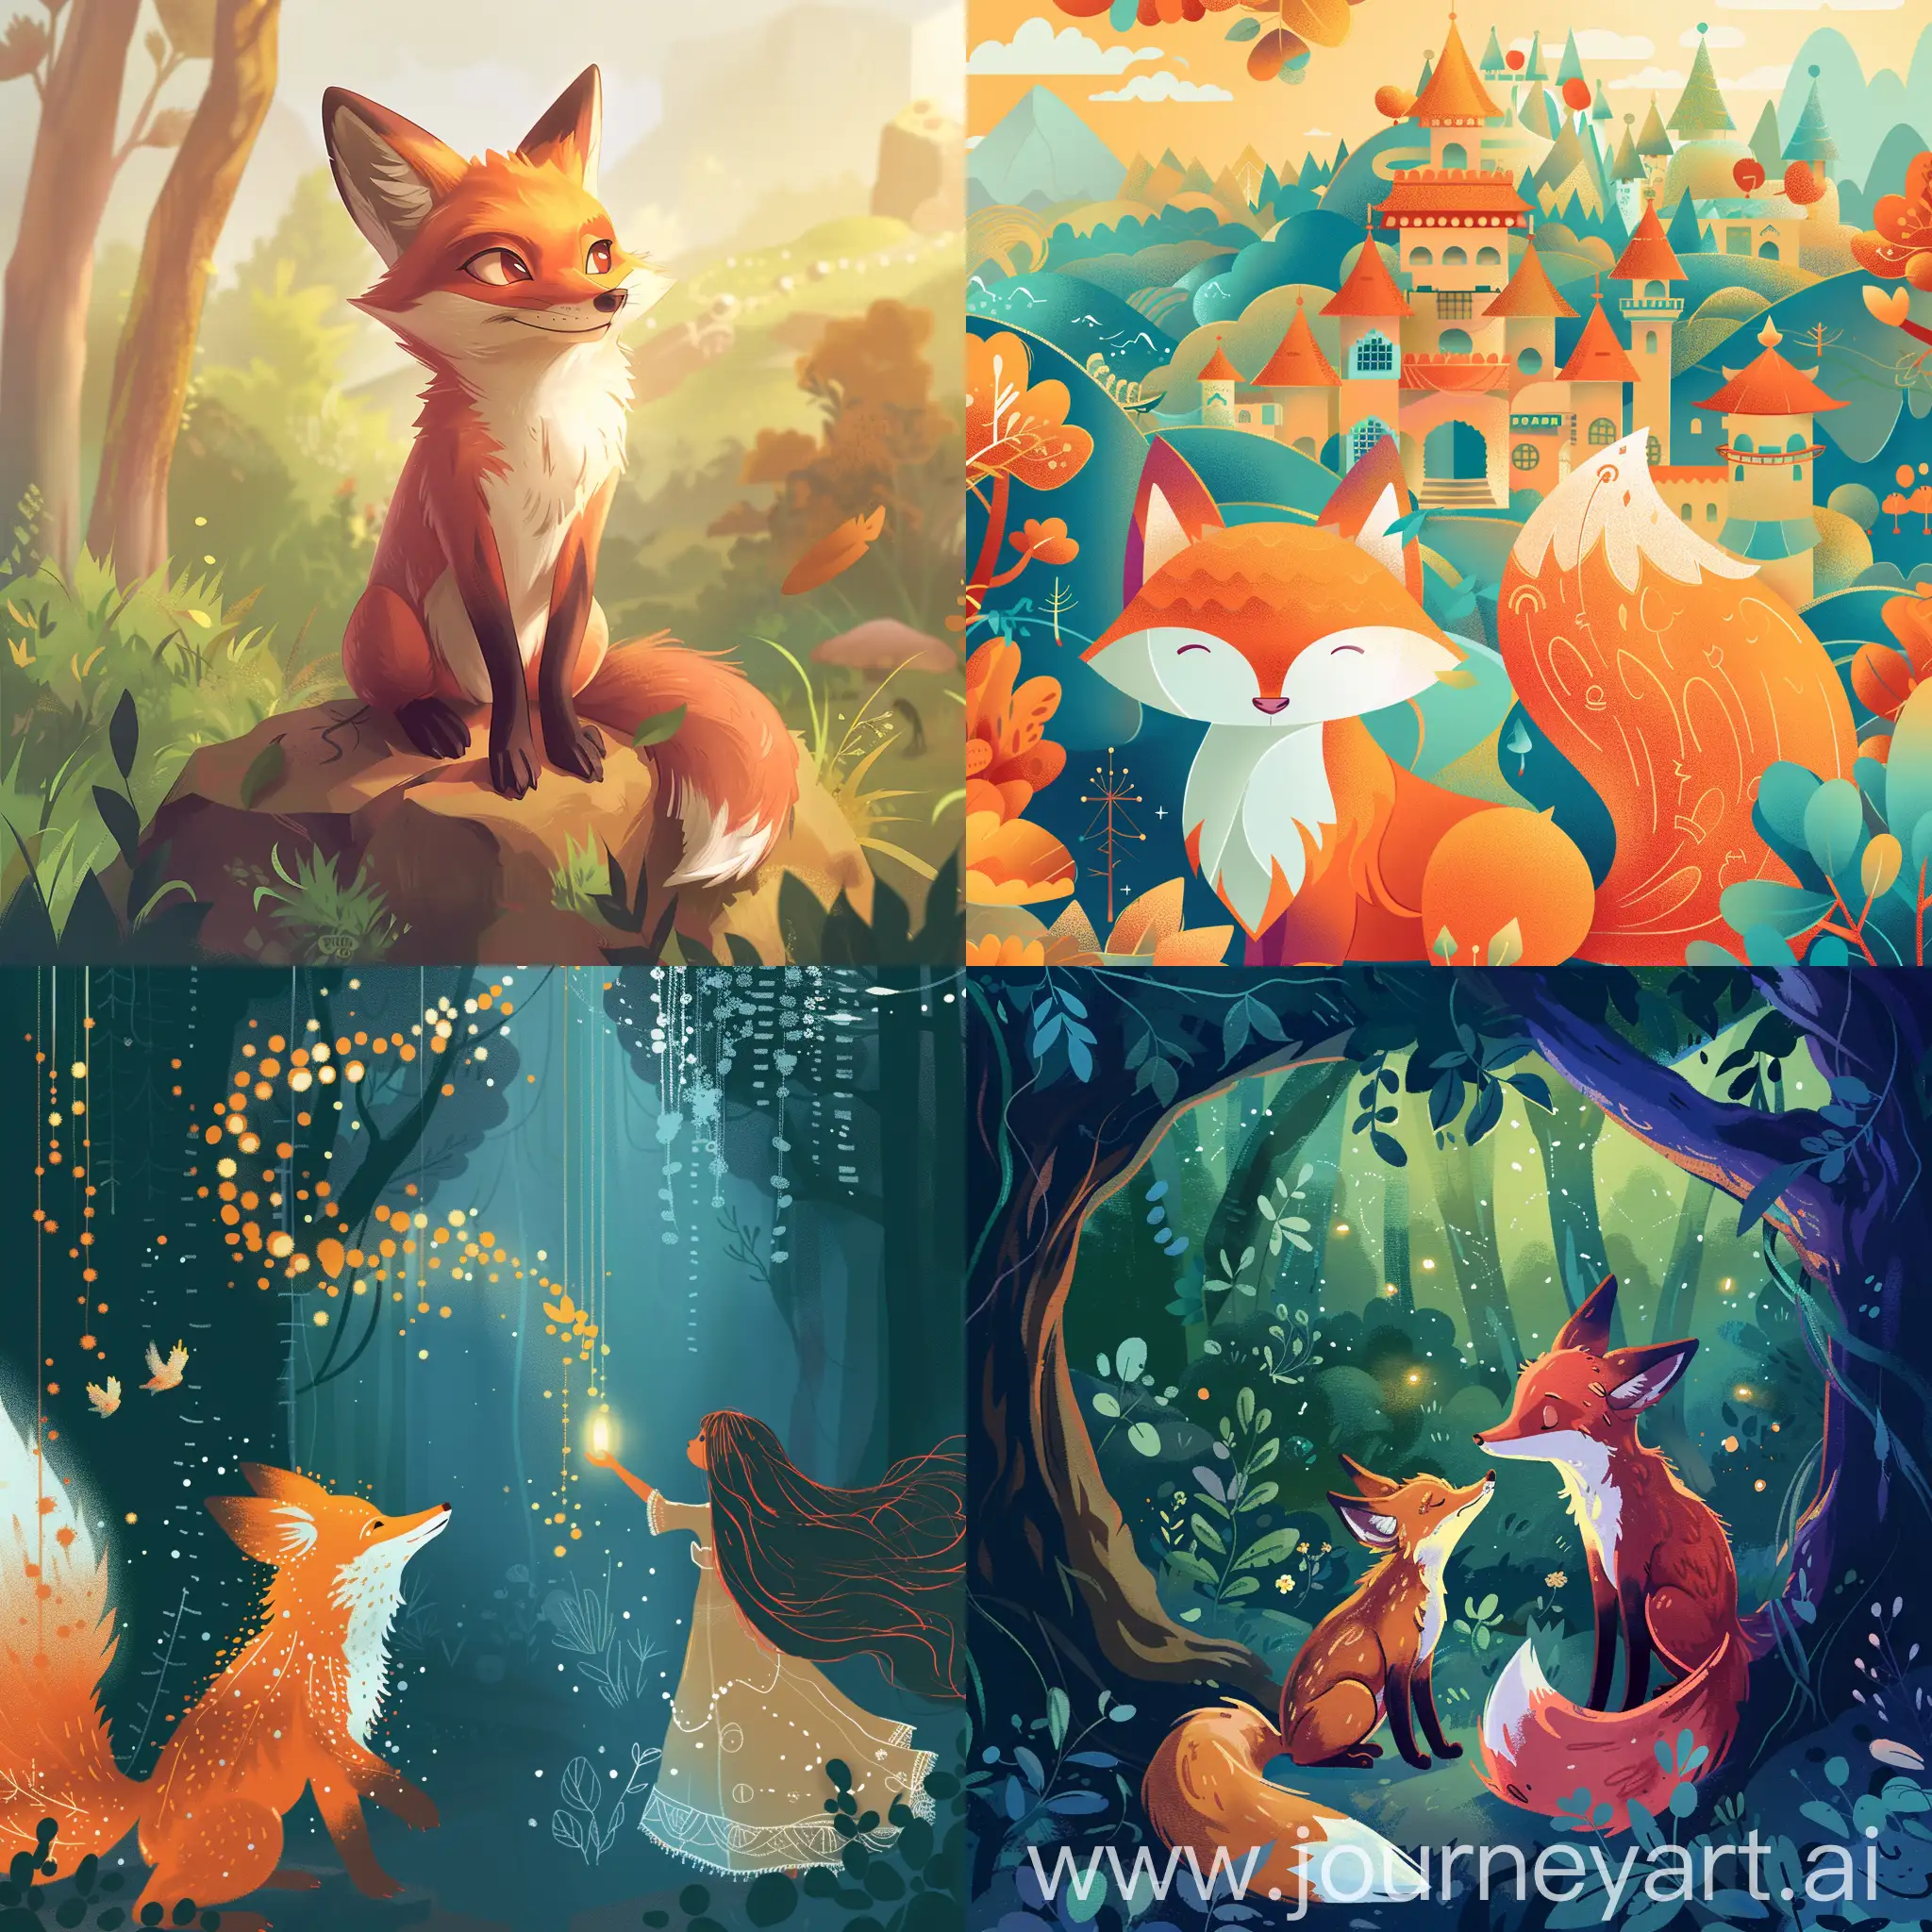  Create a charming tale in JavaScript, enriched with the dominance of React and Vue, reigning over the Python world symbolized by an endearing fox. Transform this project into a magical fairy tale of code.